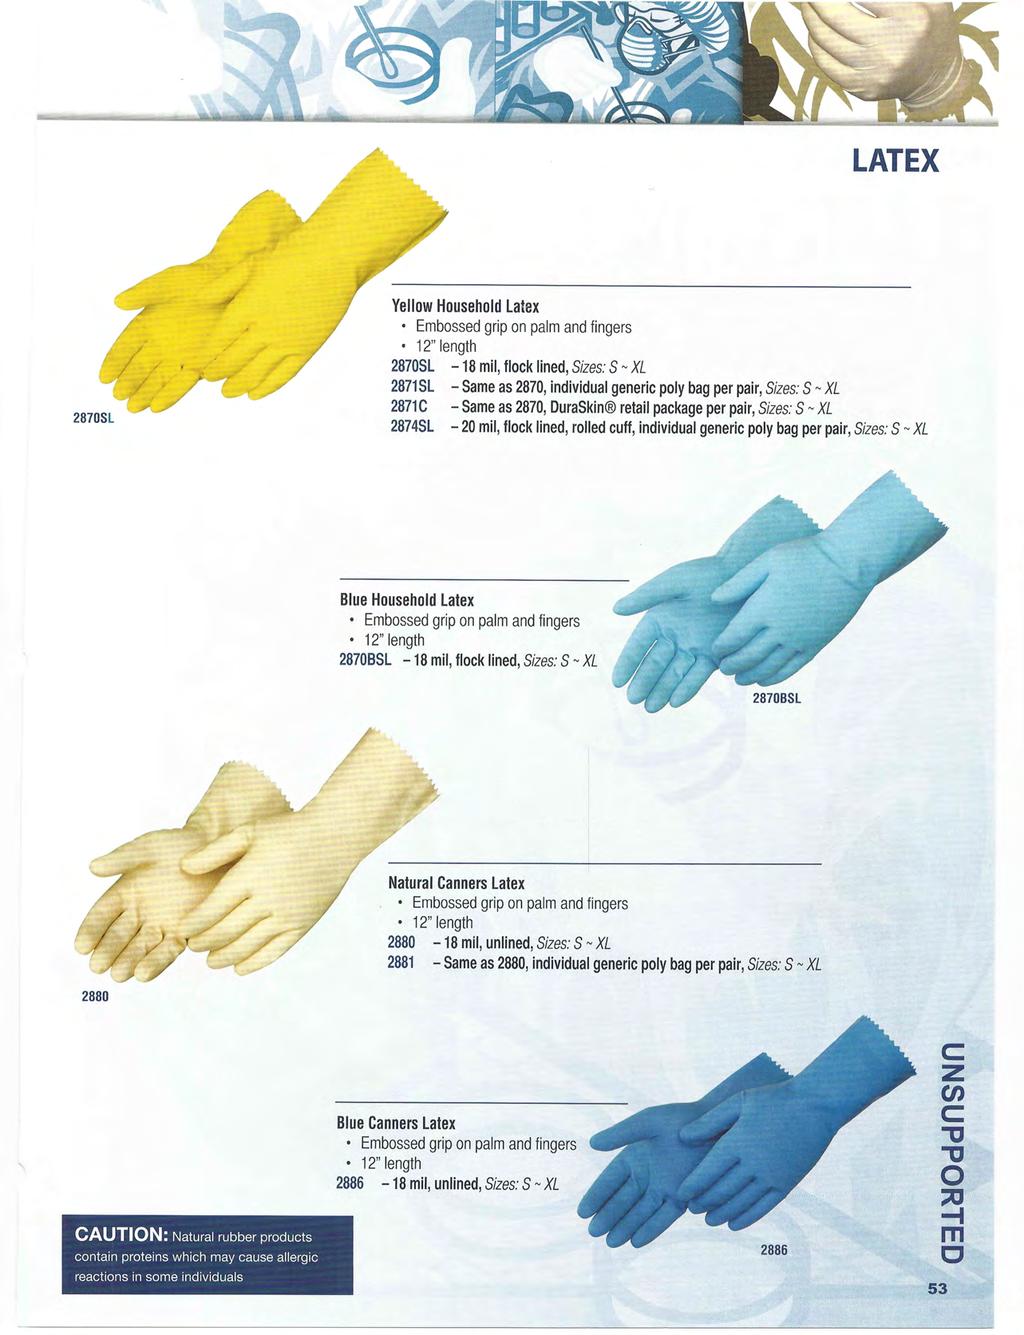 LATEX 287SL Yellow Household Latex Embossed grip on palm and fingers 12" length 287SL -18 mil, flock lined, Sizes: S - XL 2871SL - Same as 287, individual generic poly bag per pair, Sizes: S- XL 2871